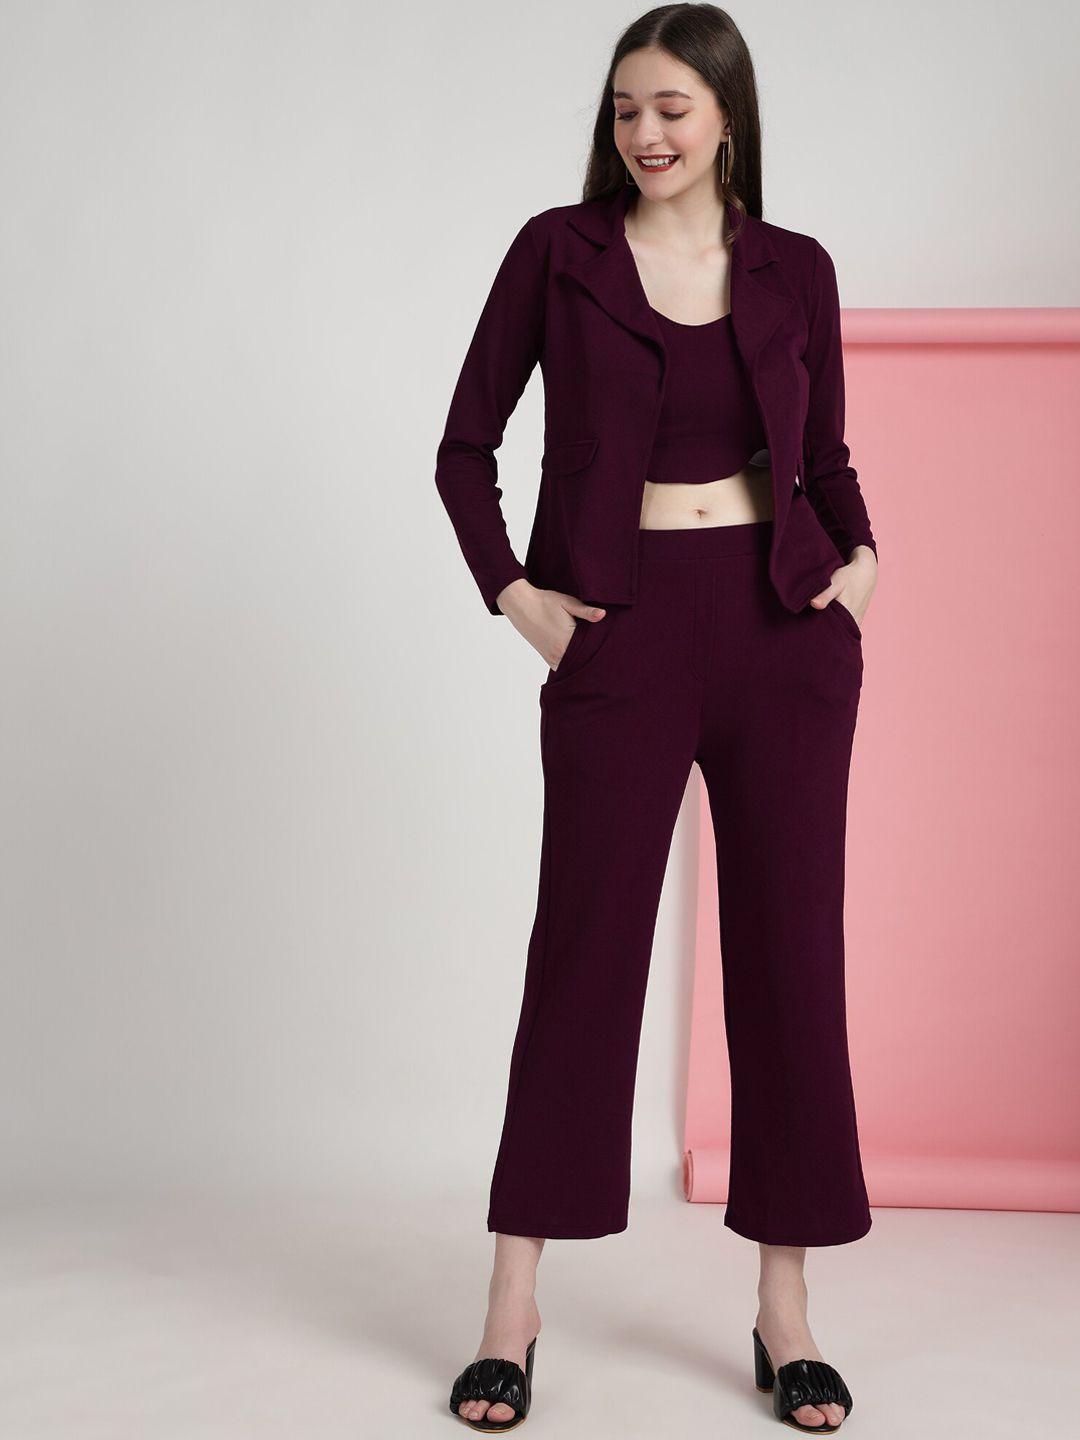 westhood v-neck top with trousers & blazer co-ords